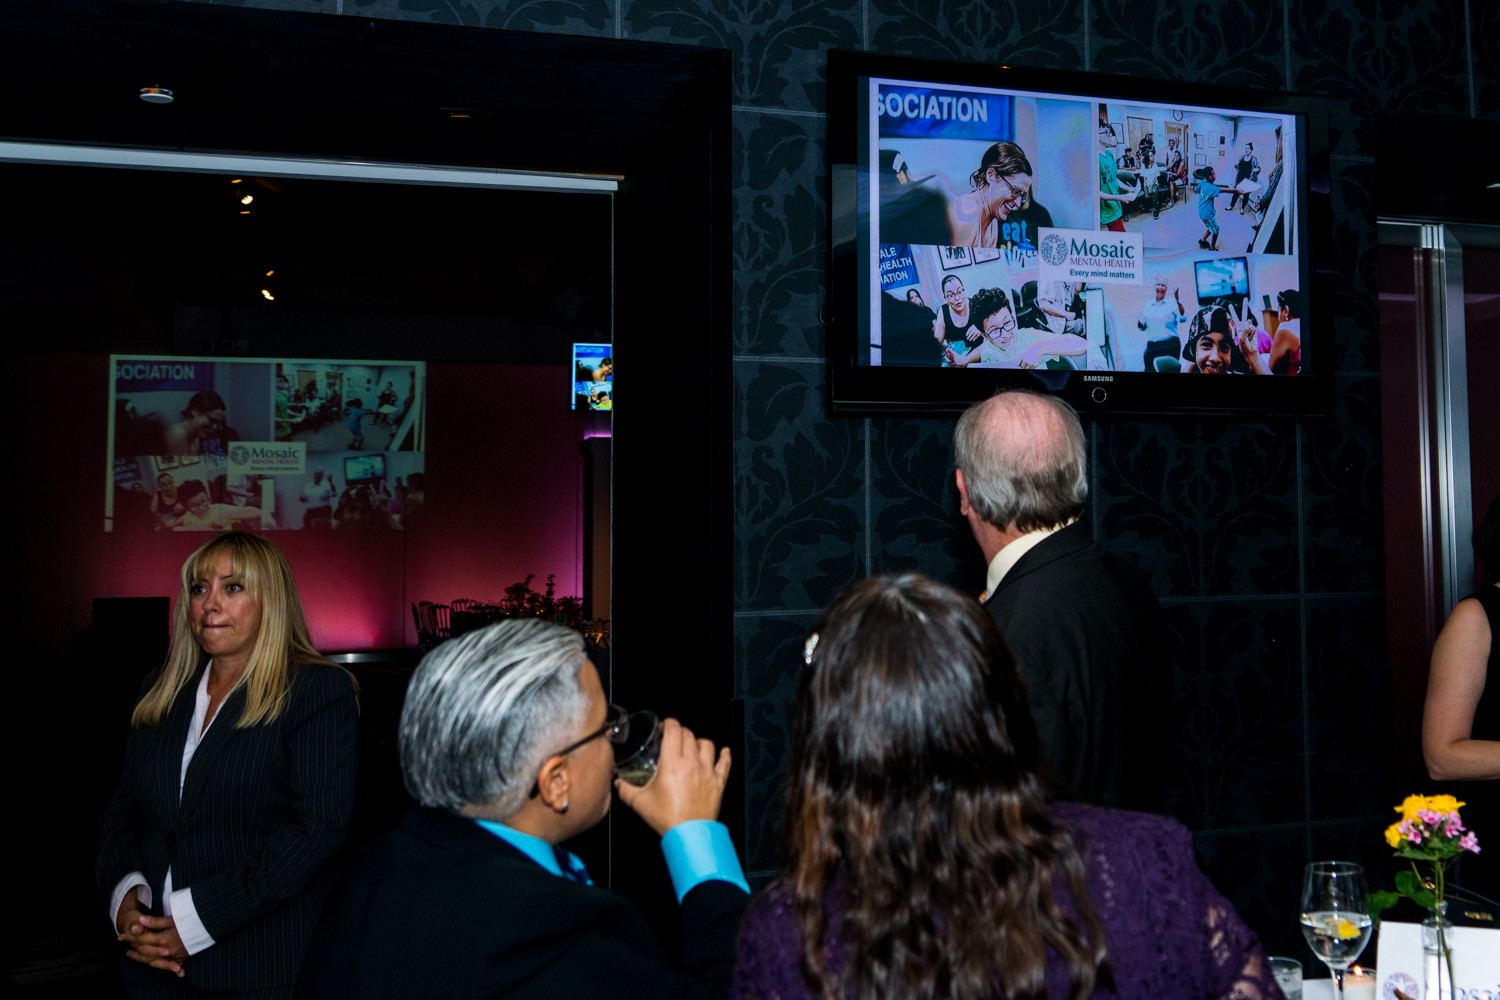 Gala attendees look at a slideshow about Mosaic Mental Health. The organization offers services like counseling and youth programs, serving 1,000 patients annually.